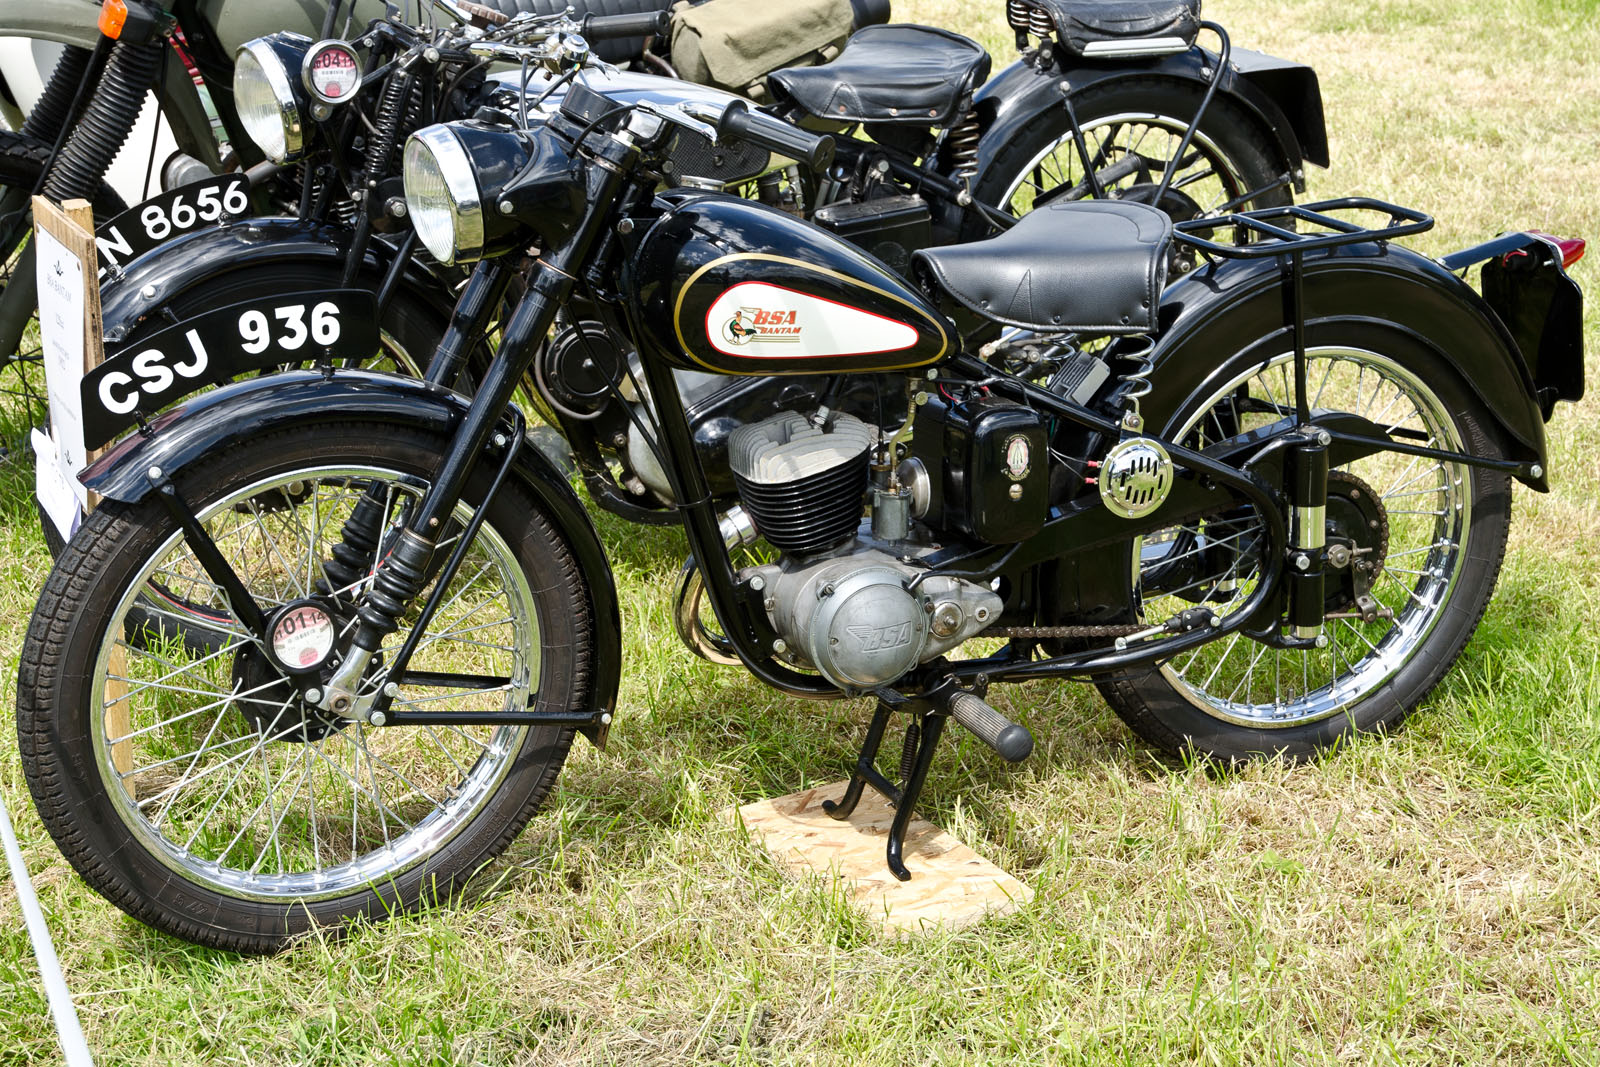 two old style motorcycles are parked in a grassy area